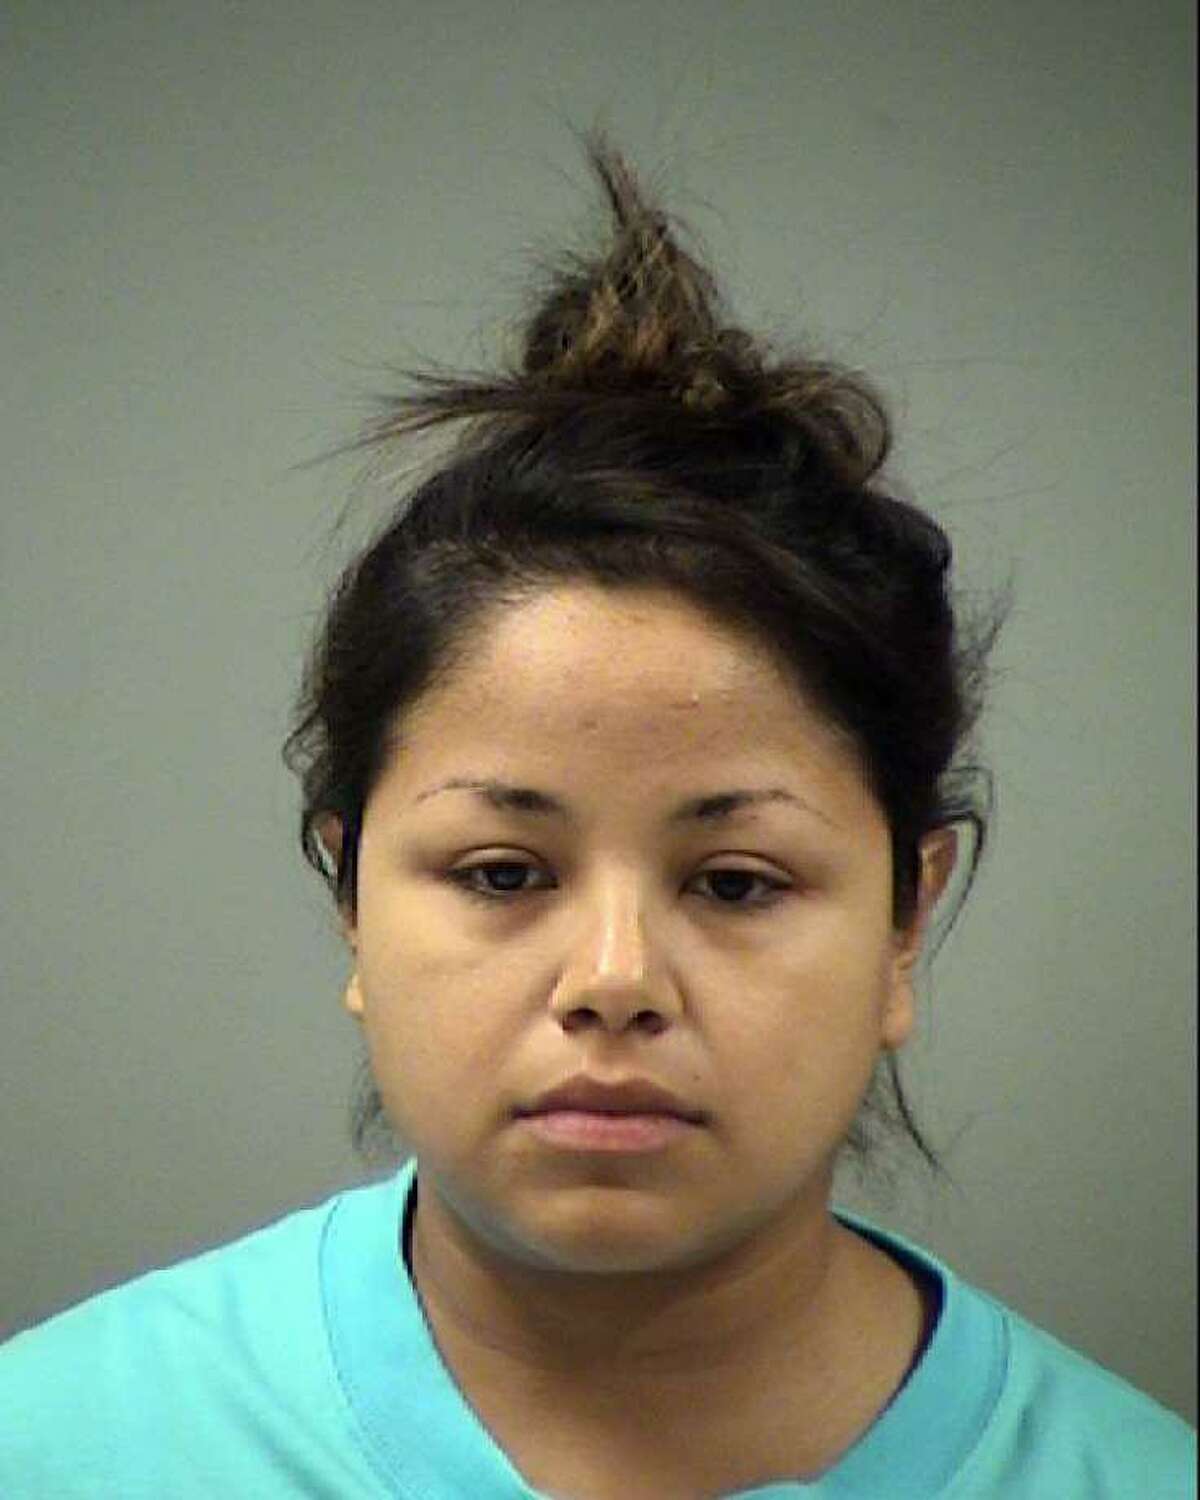 Crystal Nicole Rodriguez faces a charge of improper relationship between educator and student. She was booked into the Bexar County Jail on a $20,000 bond.